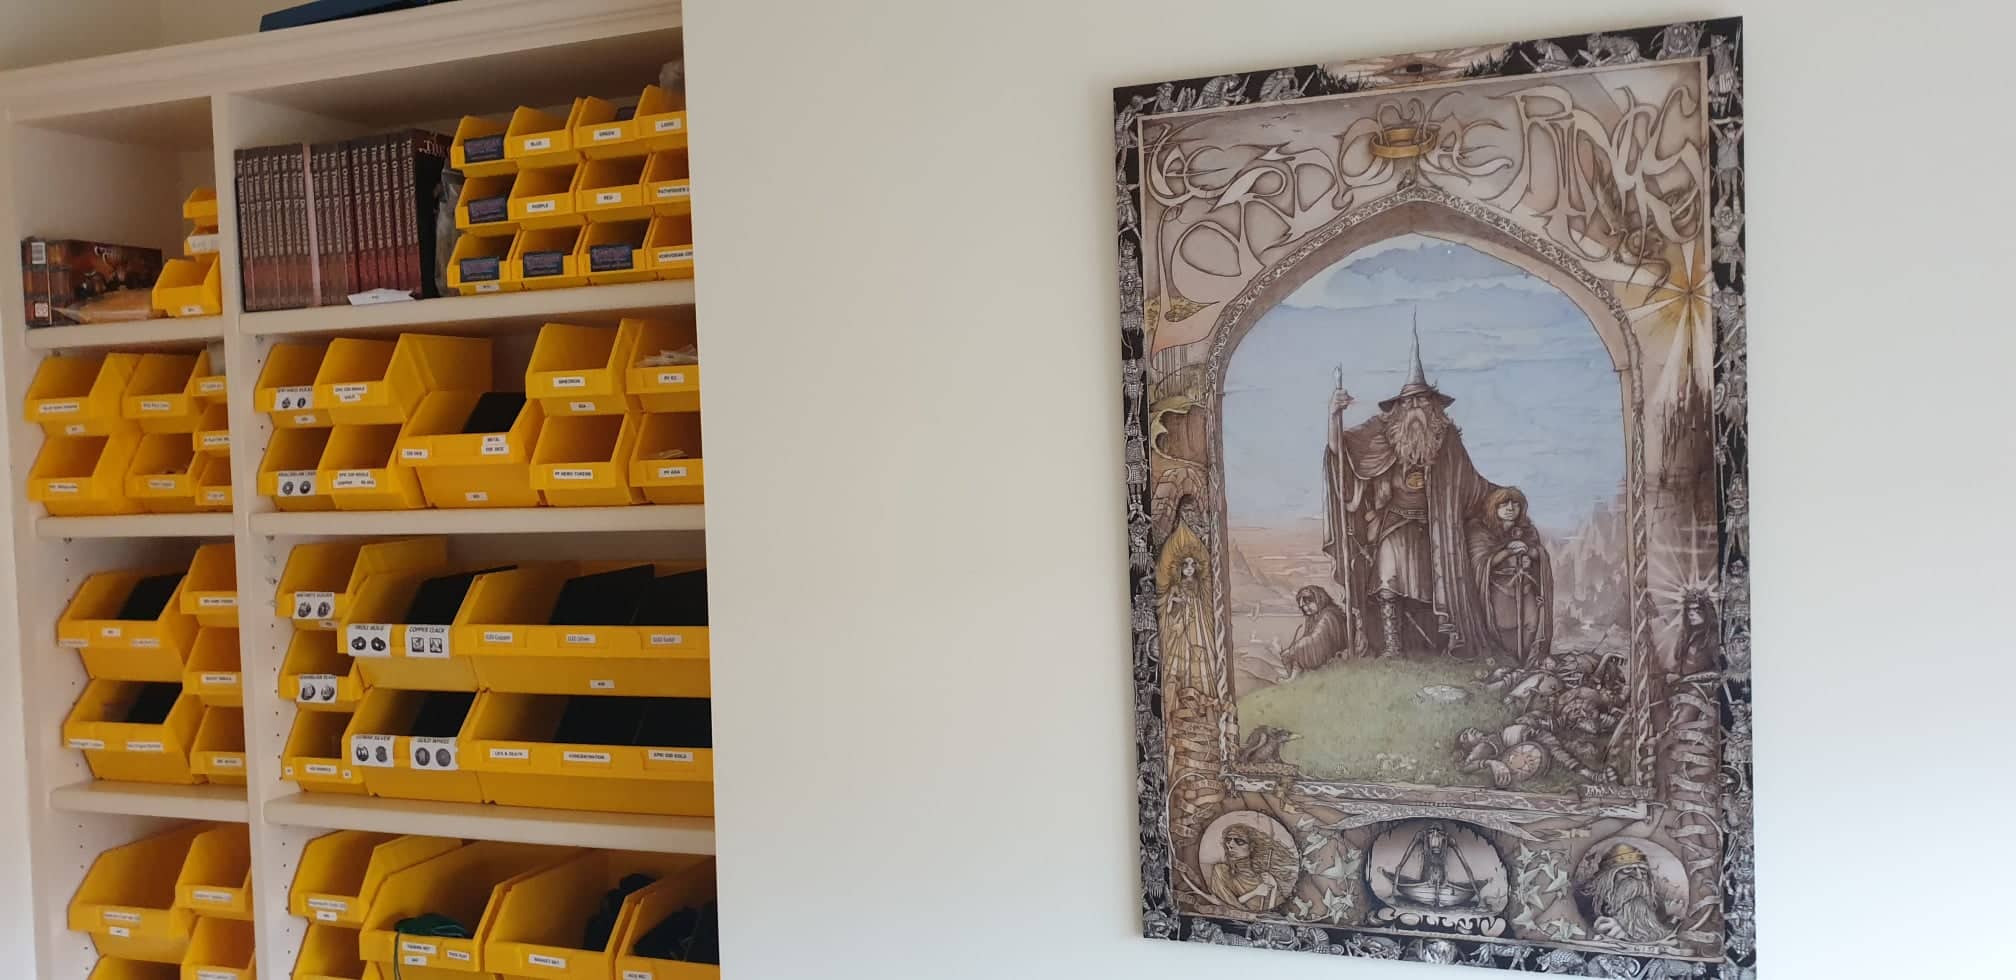 Image of our packing room with Lord of the Rings poster